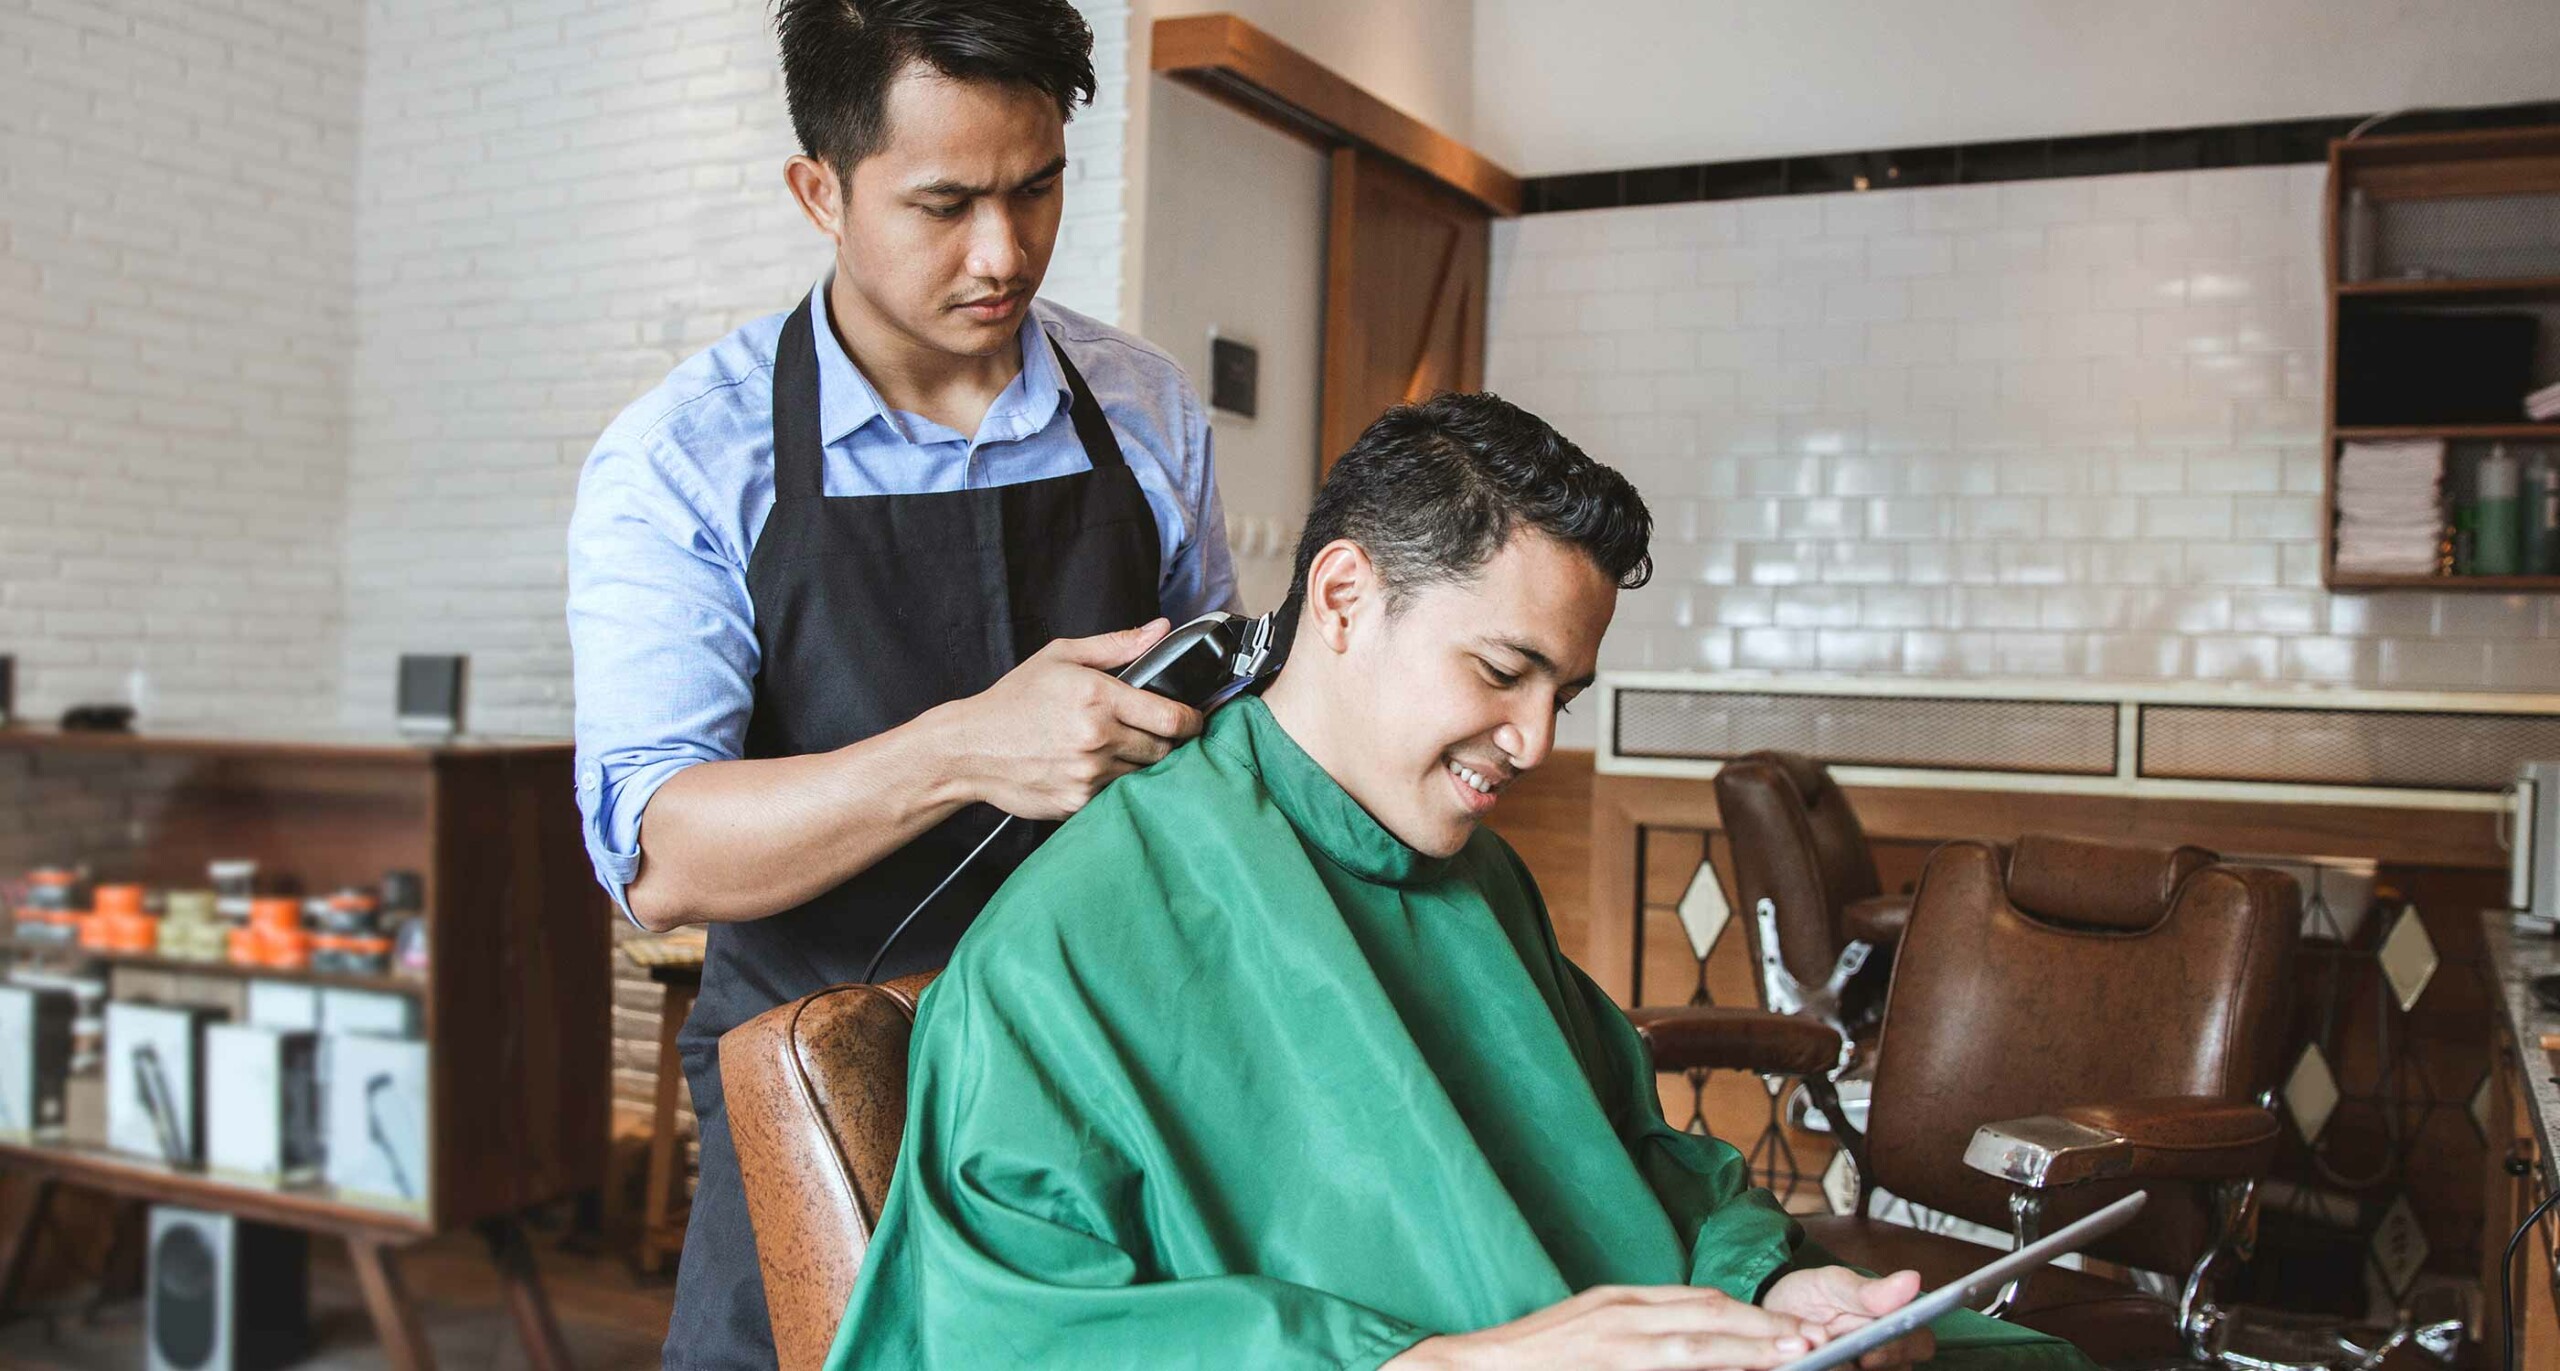 Men's Haircut Prices: How Much Will It Cost You? - StyleSeat